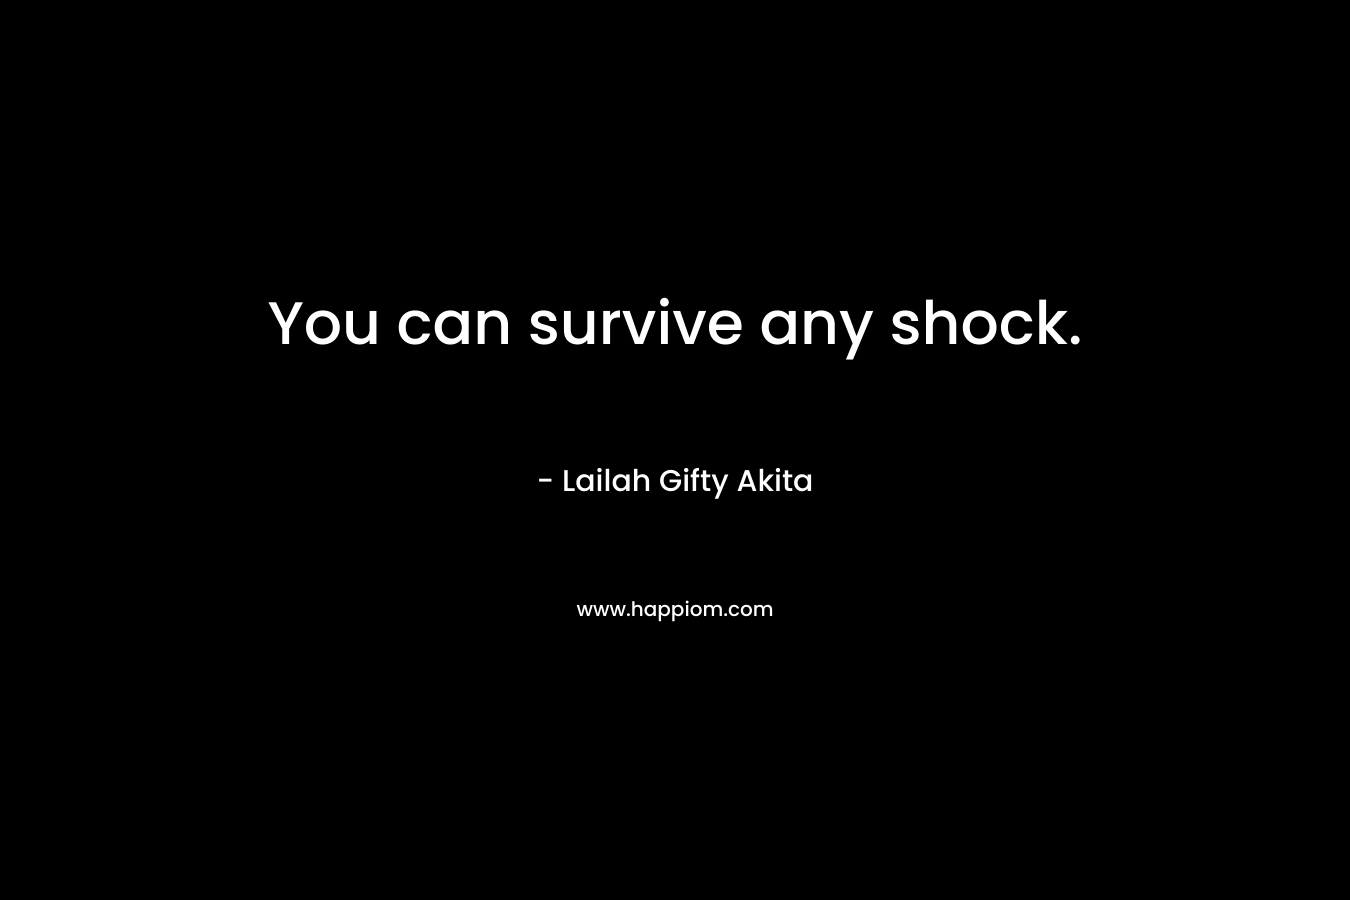 You can survive any shock. – Lailah Gifty Akita